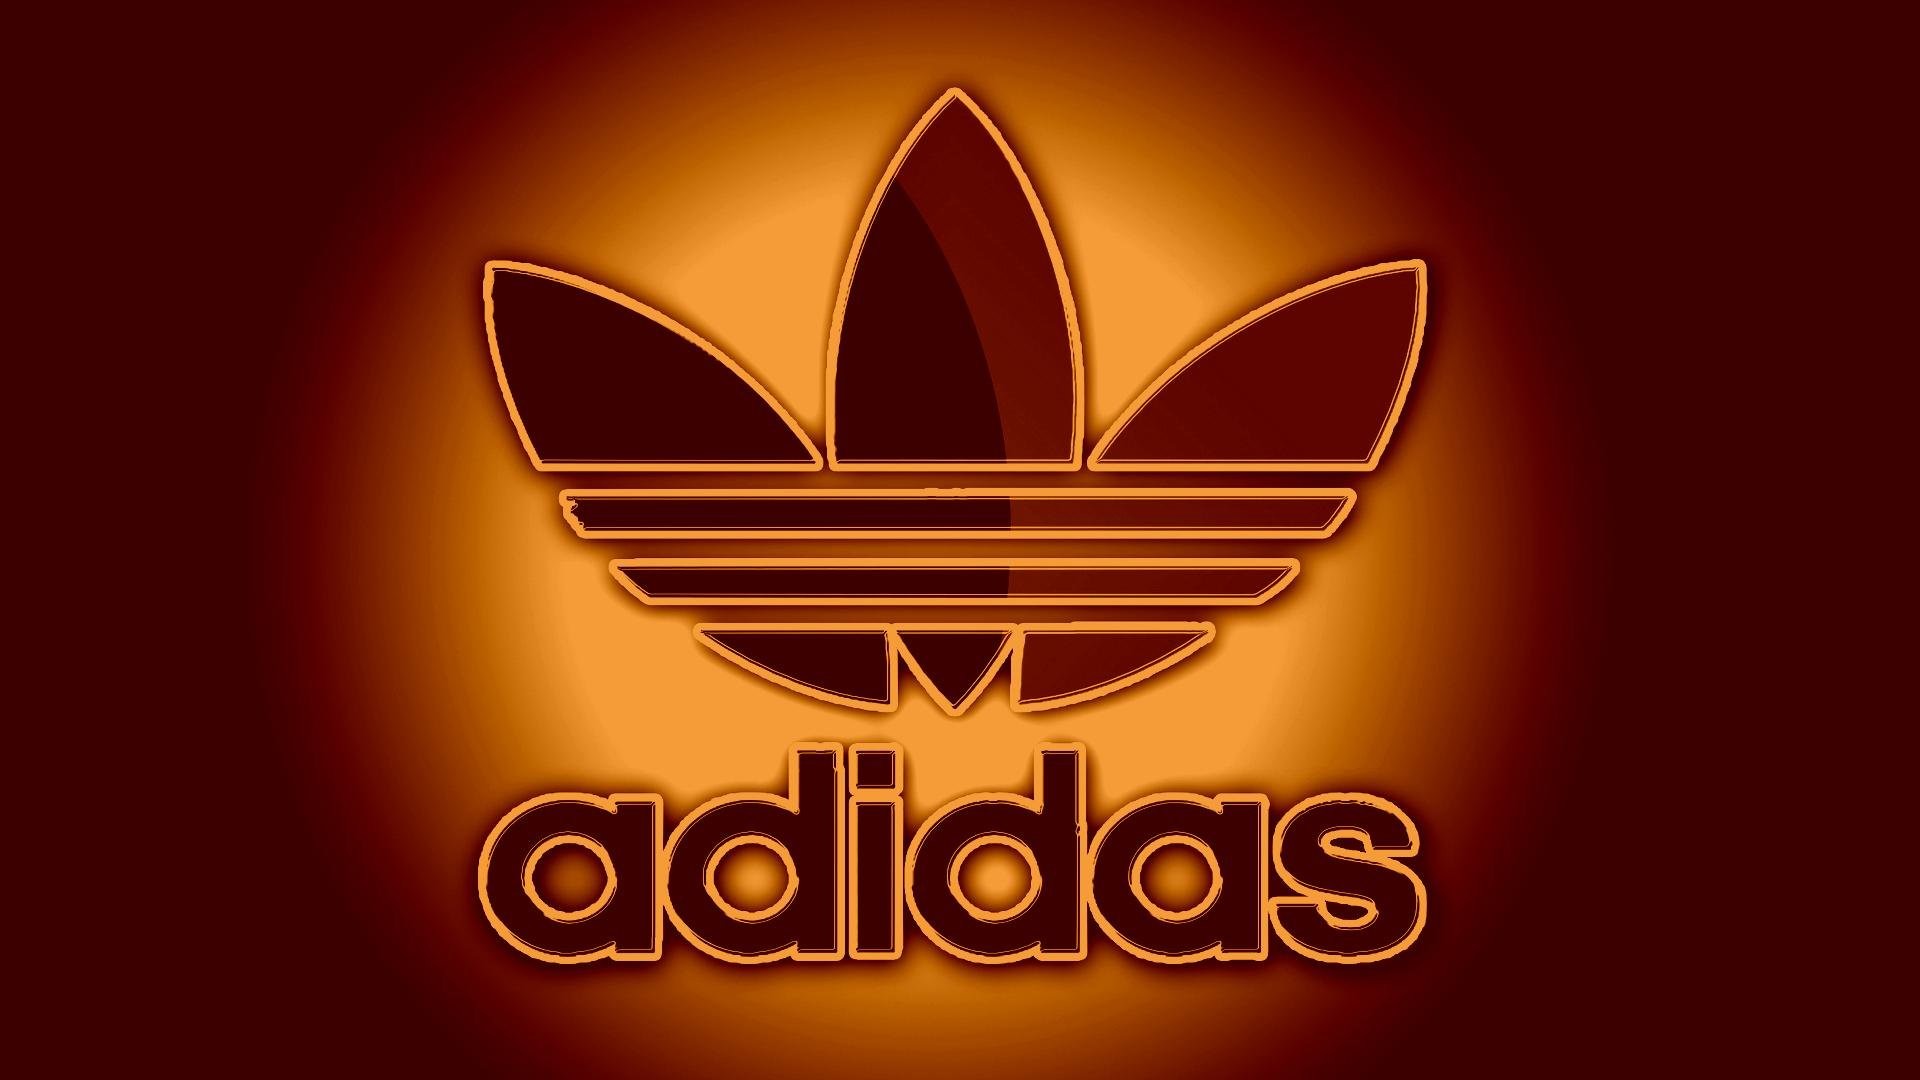 1920x1080 undefined Wallpaper Adidas (36 Wallpapers) | Adorable Wallpapers